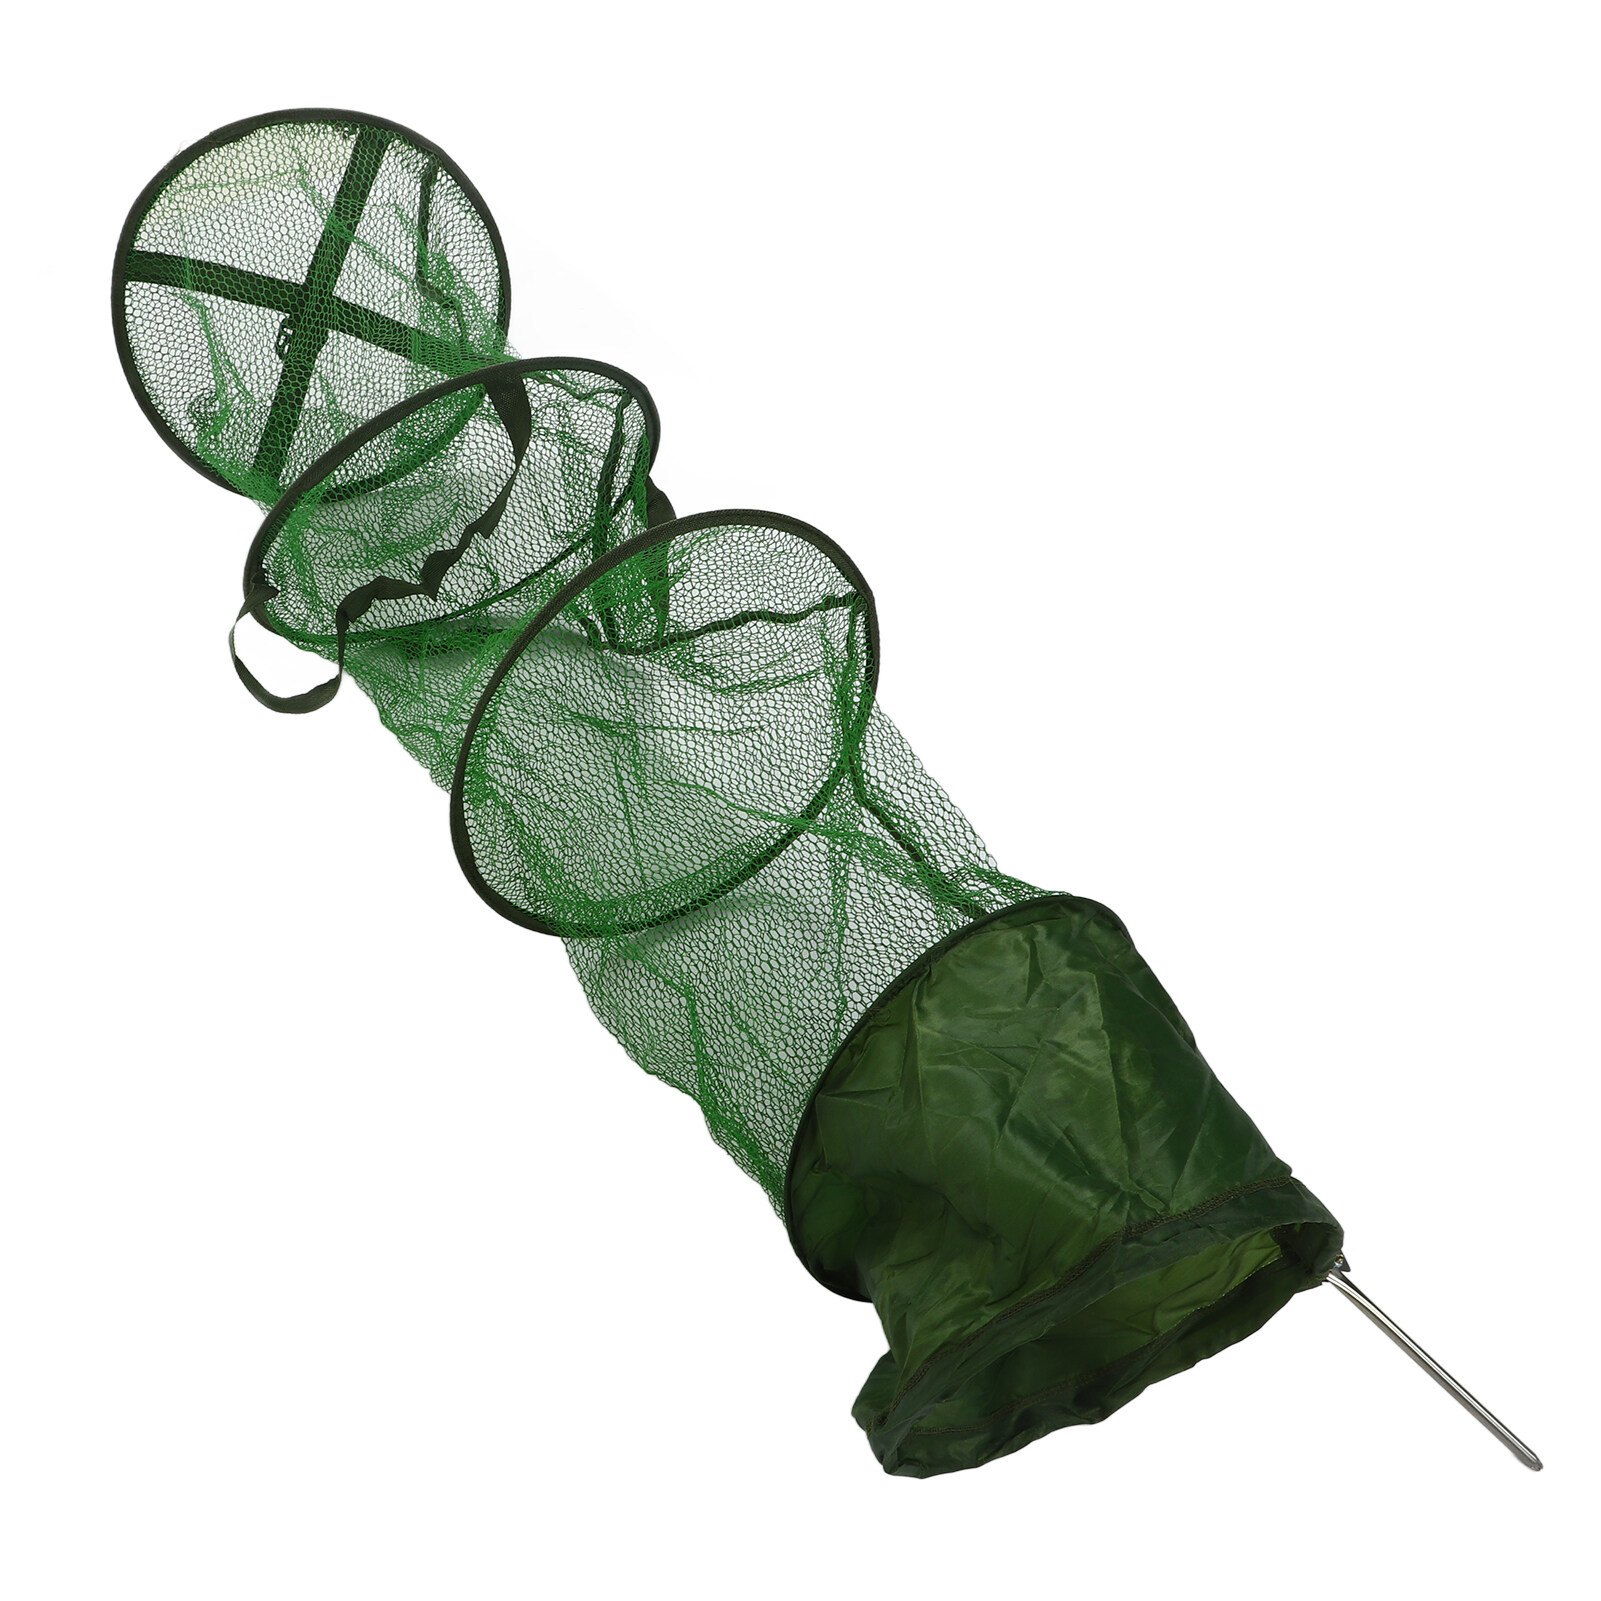 SportsHour] Collapsible Fishing Net Cage Portable Scratch